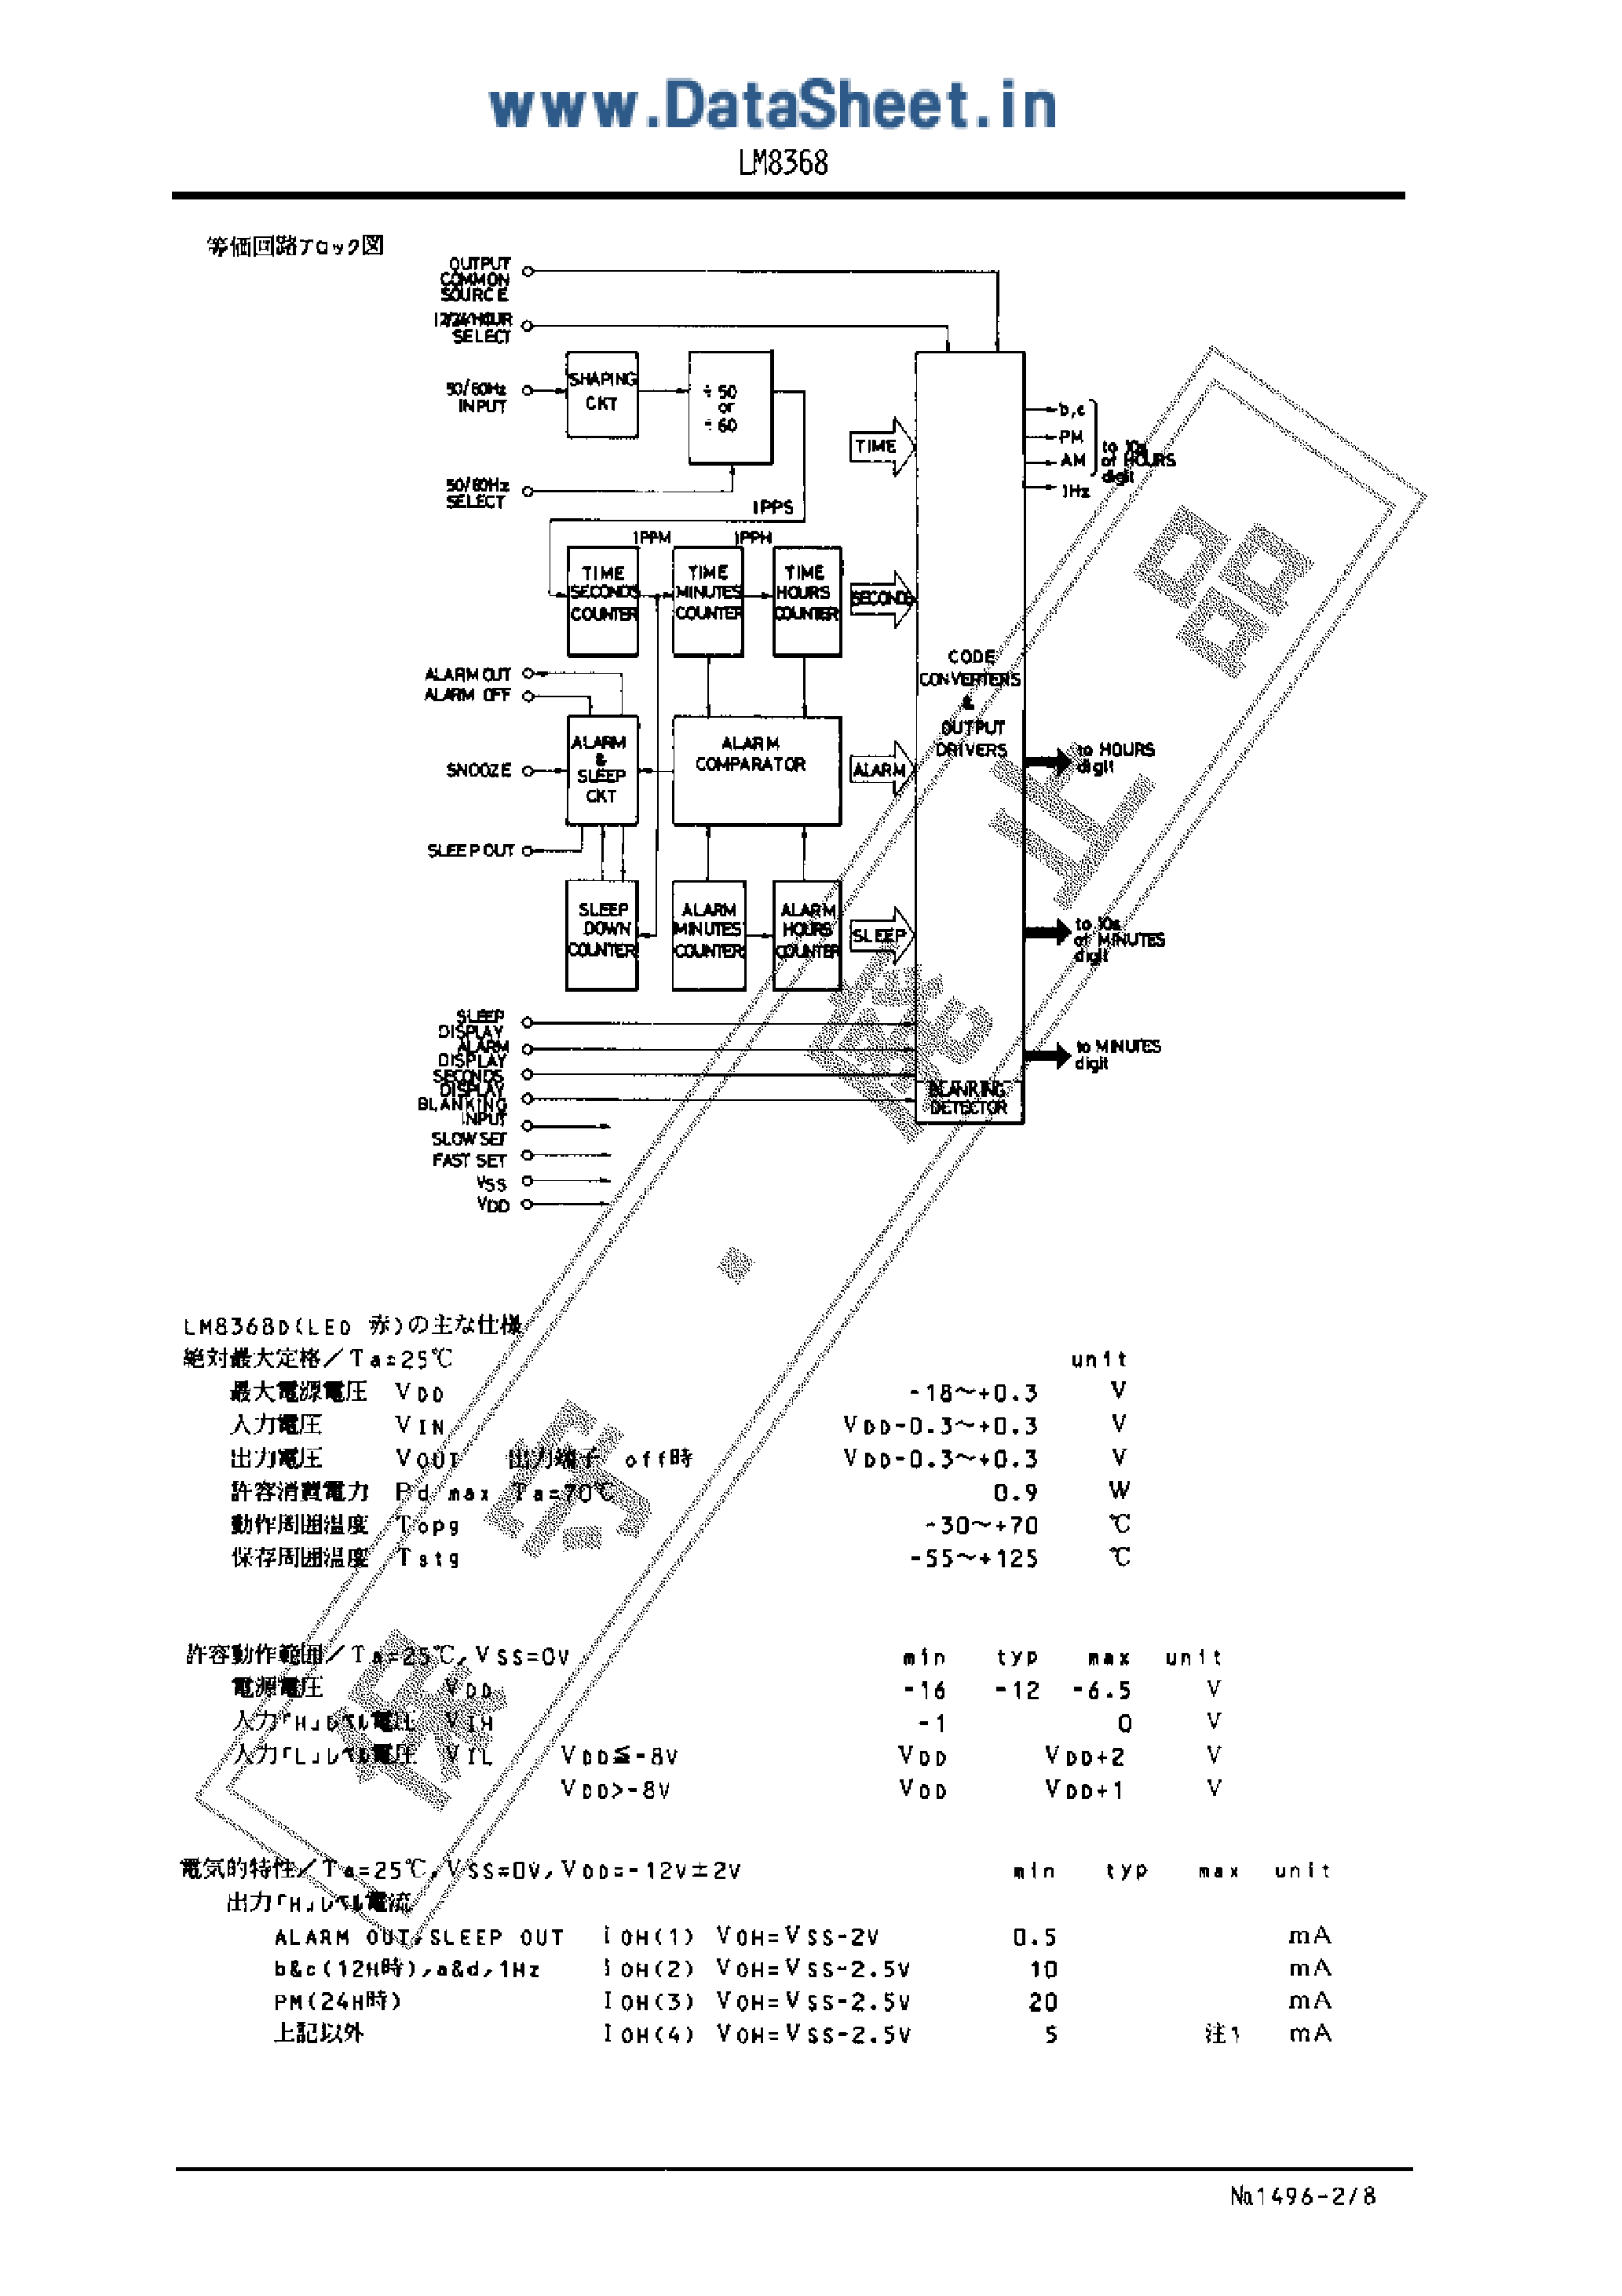 Datasheet LM8368 - LM8368 page 2